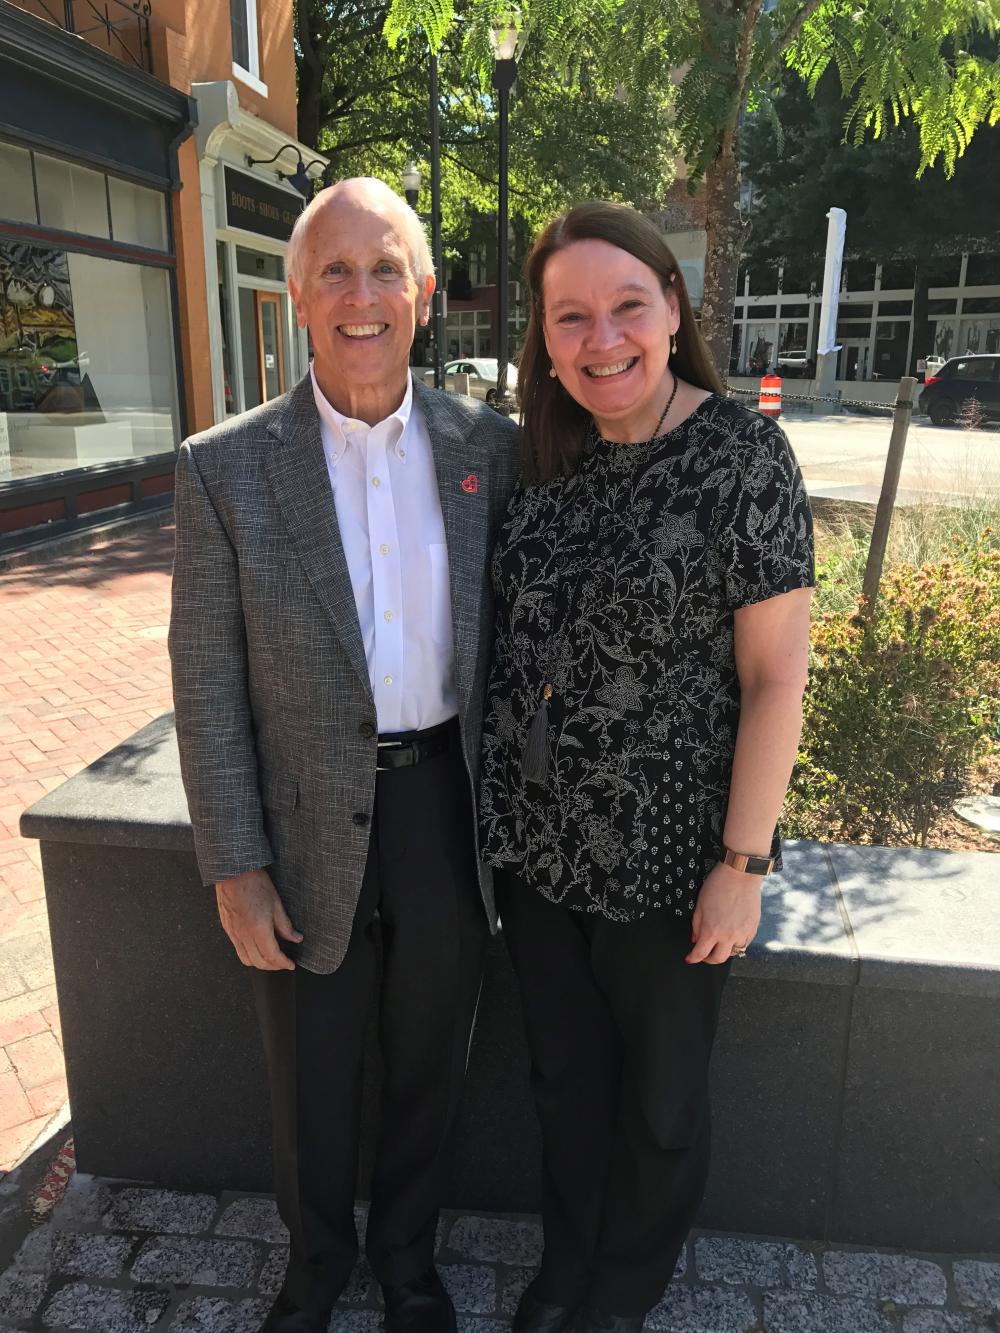 Bob Hershberger stands with Mary Ann Peberdy, M.D., director of VCU Health’s Advanced Resuscitation, Cooling Therapeutics and Intensive Care (ARCTIC) post-cardiac arrest program. Dr. Peberdy treated Bob after he suffered a cardiac arrest in Williamsburg.